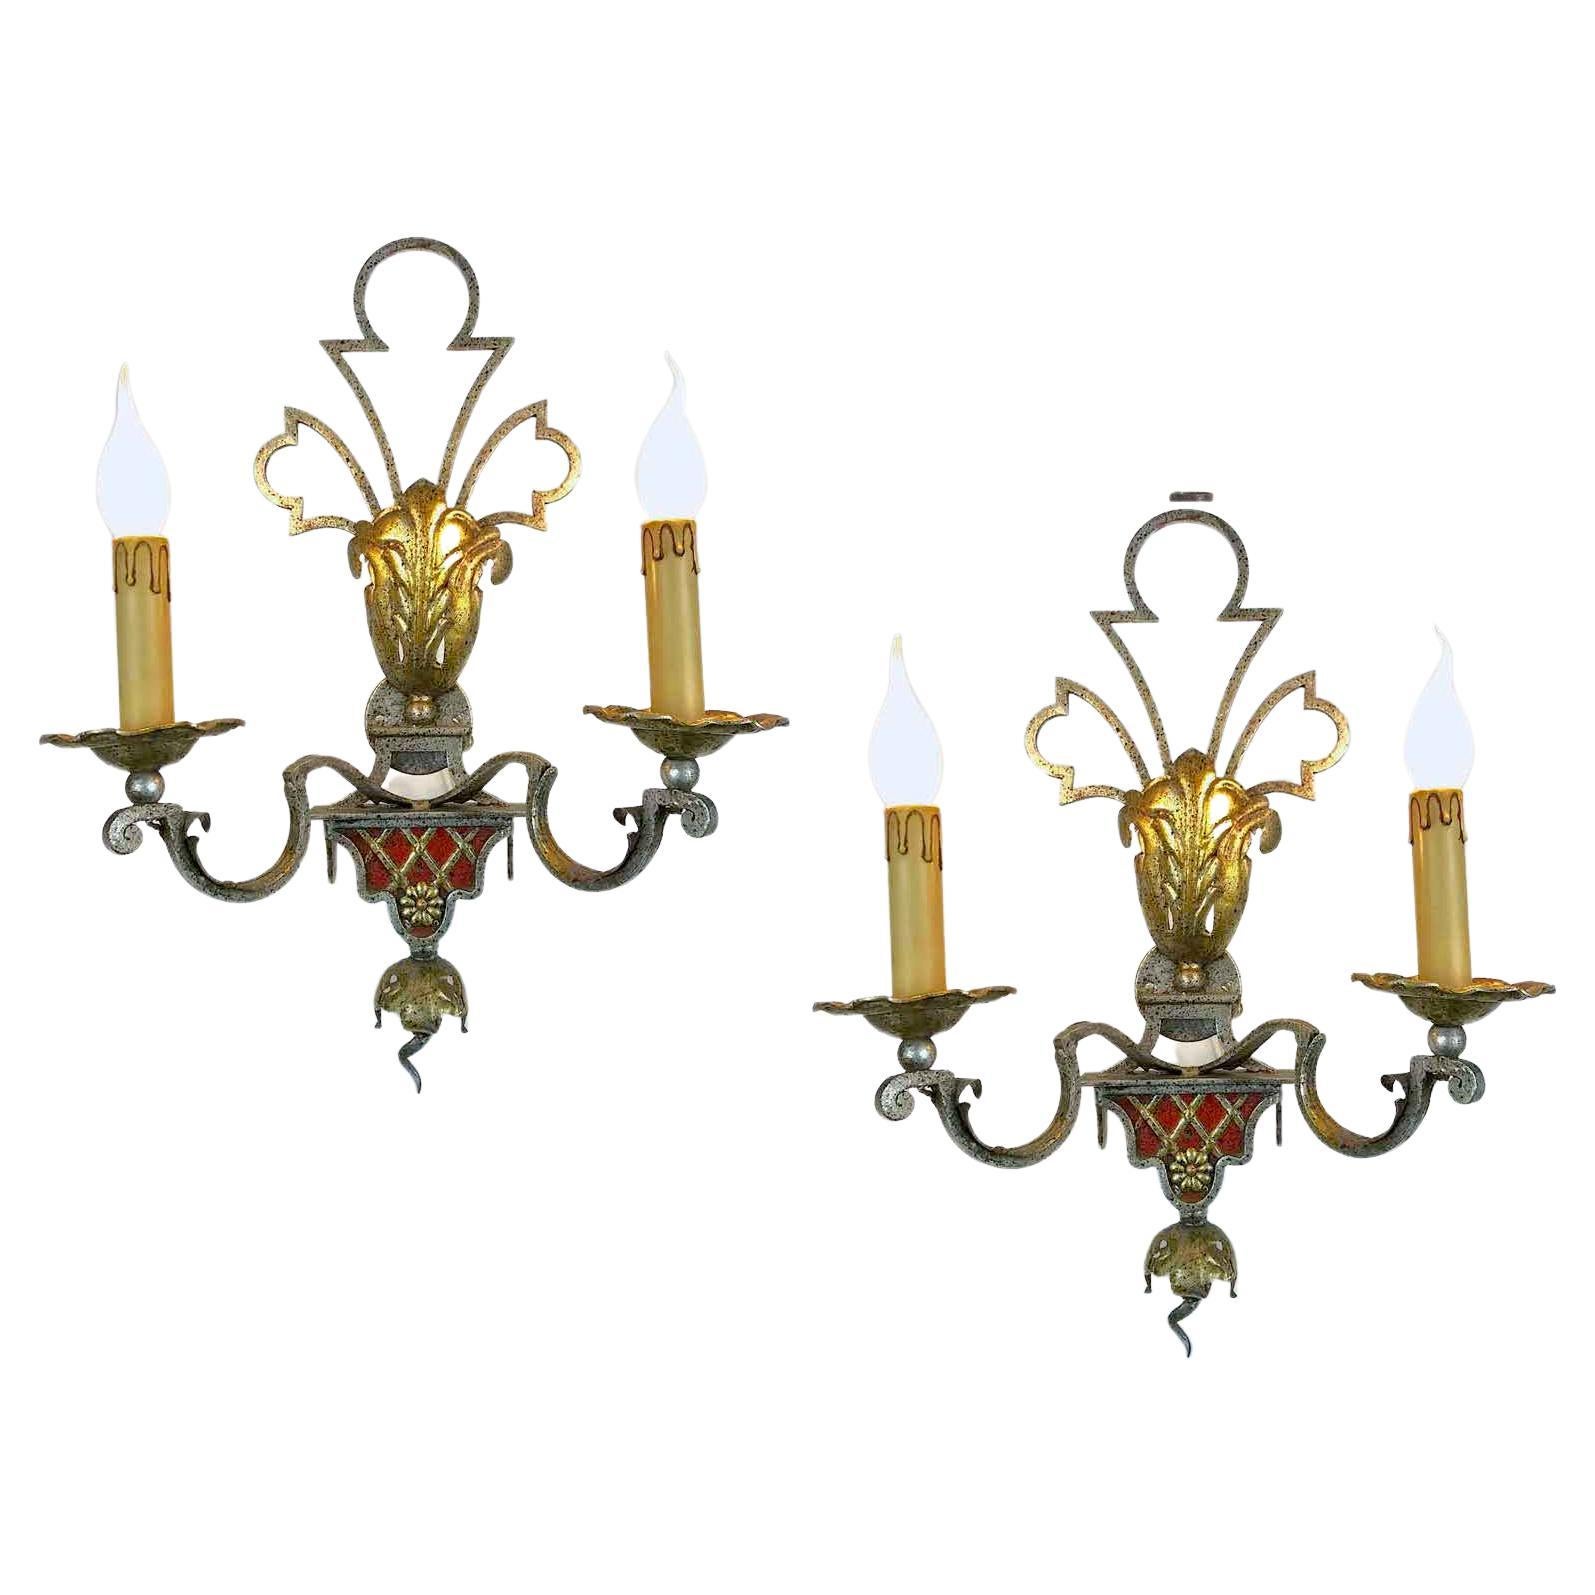 Italian Florentine Pair of Iron Sconces by Banci Firenze 1980 Renaissance Style For Sale